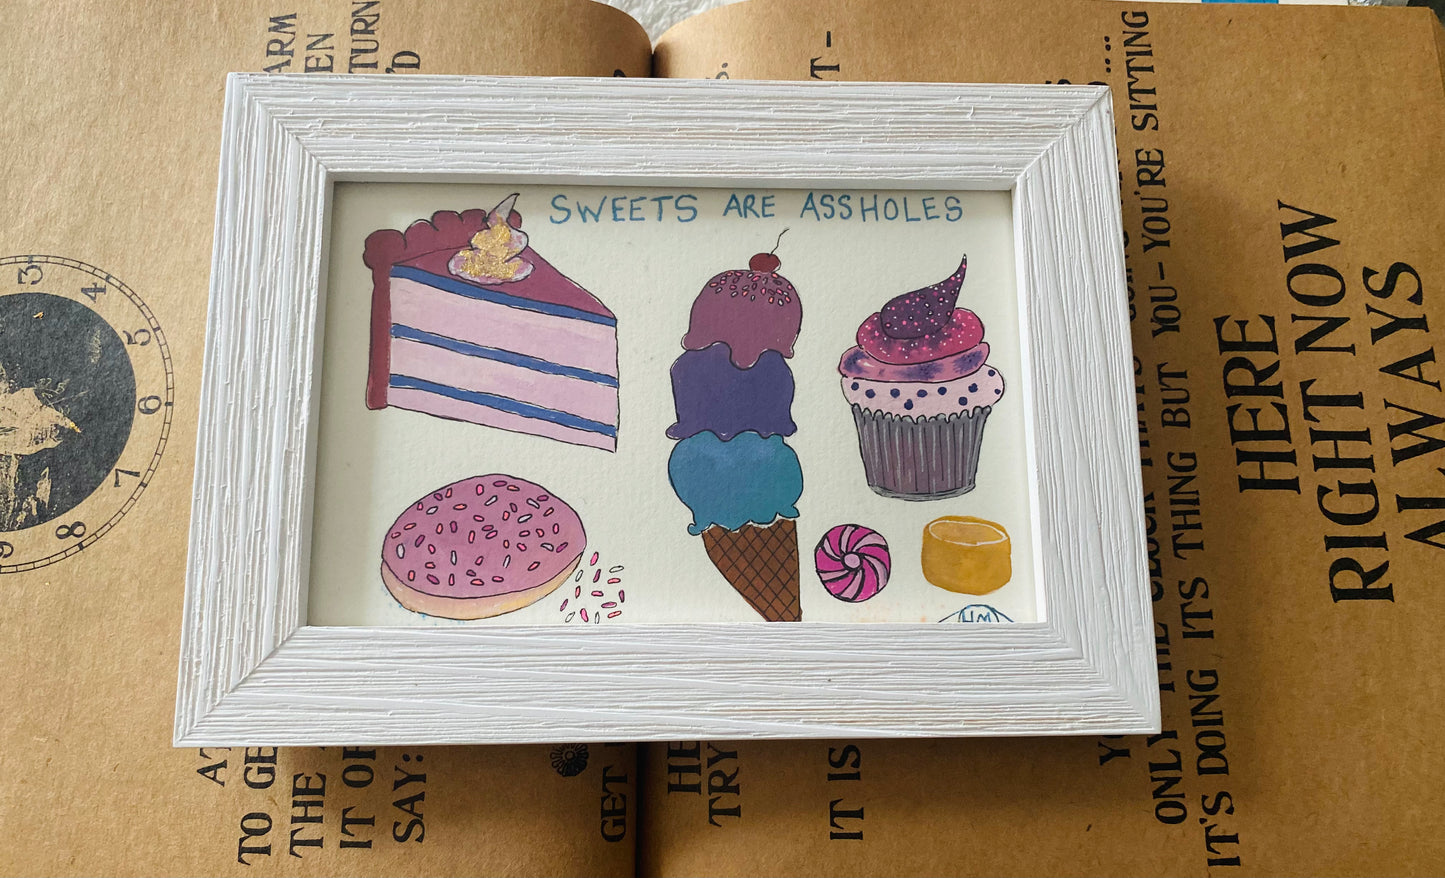 Sweets are Assholes - Original 4x6 - Moon Room Shop and Wellness